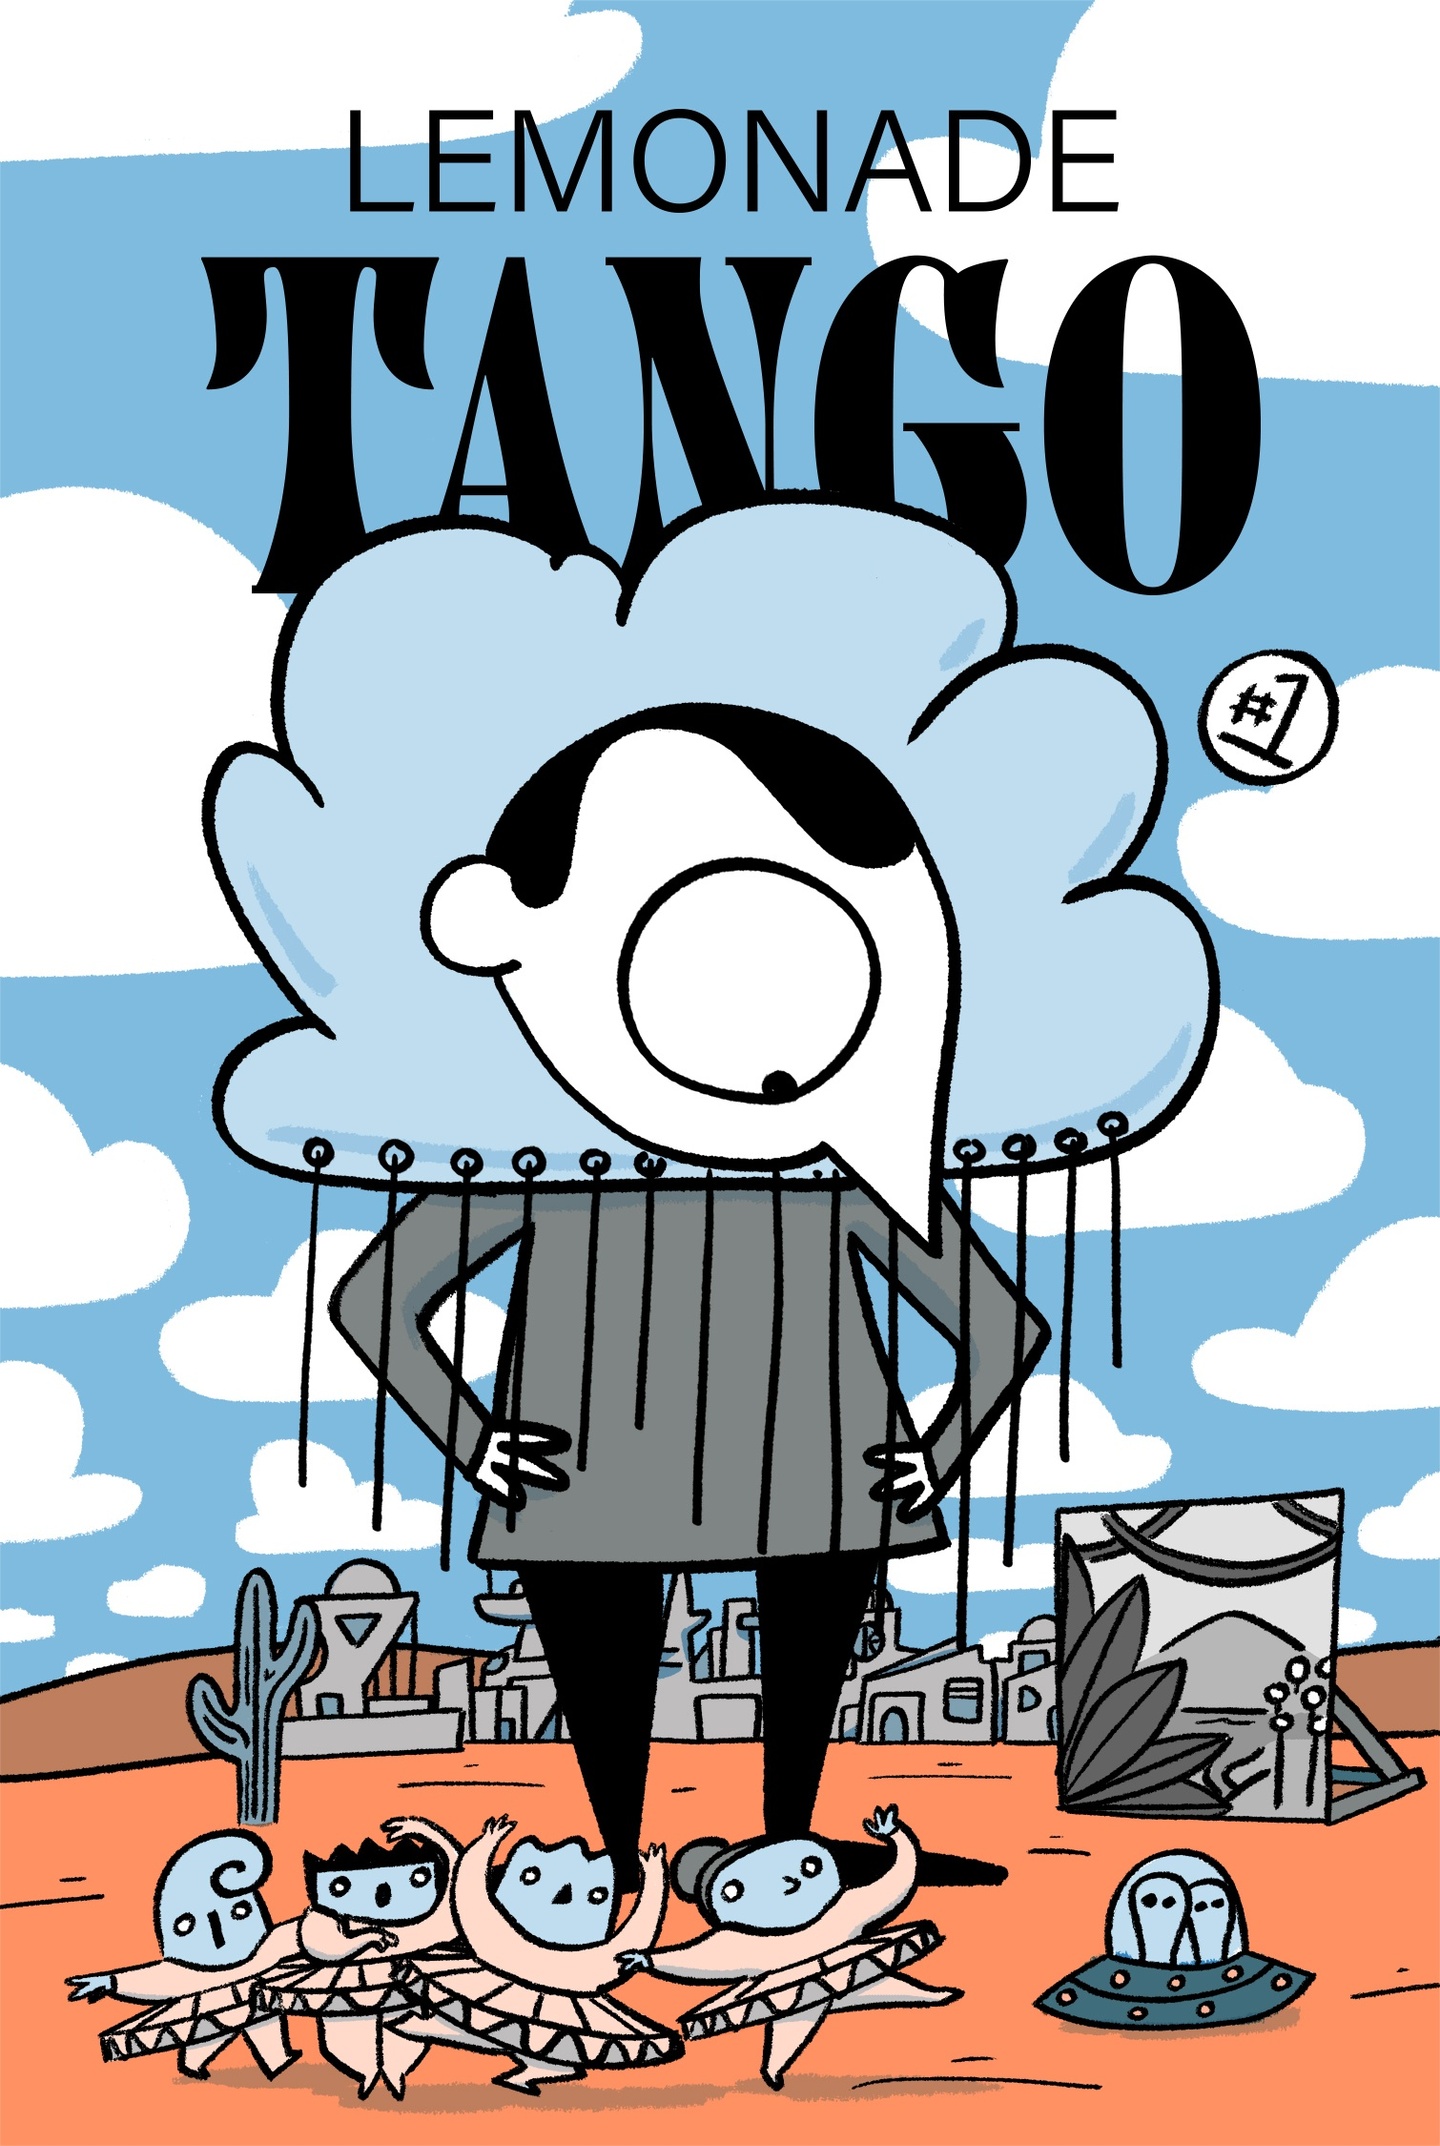 LEMONADE TANGO book cover depicting an illustrated man in a fluffy collared shirt looking down on smaller dancing people and aliens in a spaceship